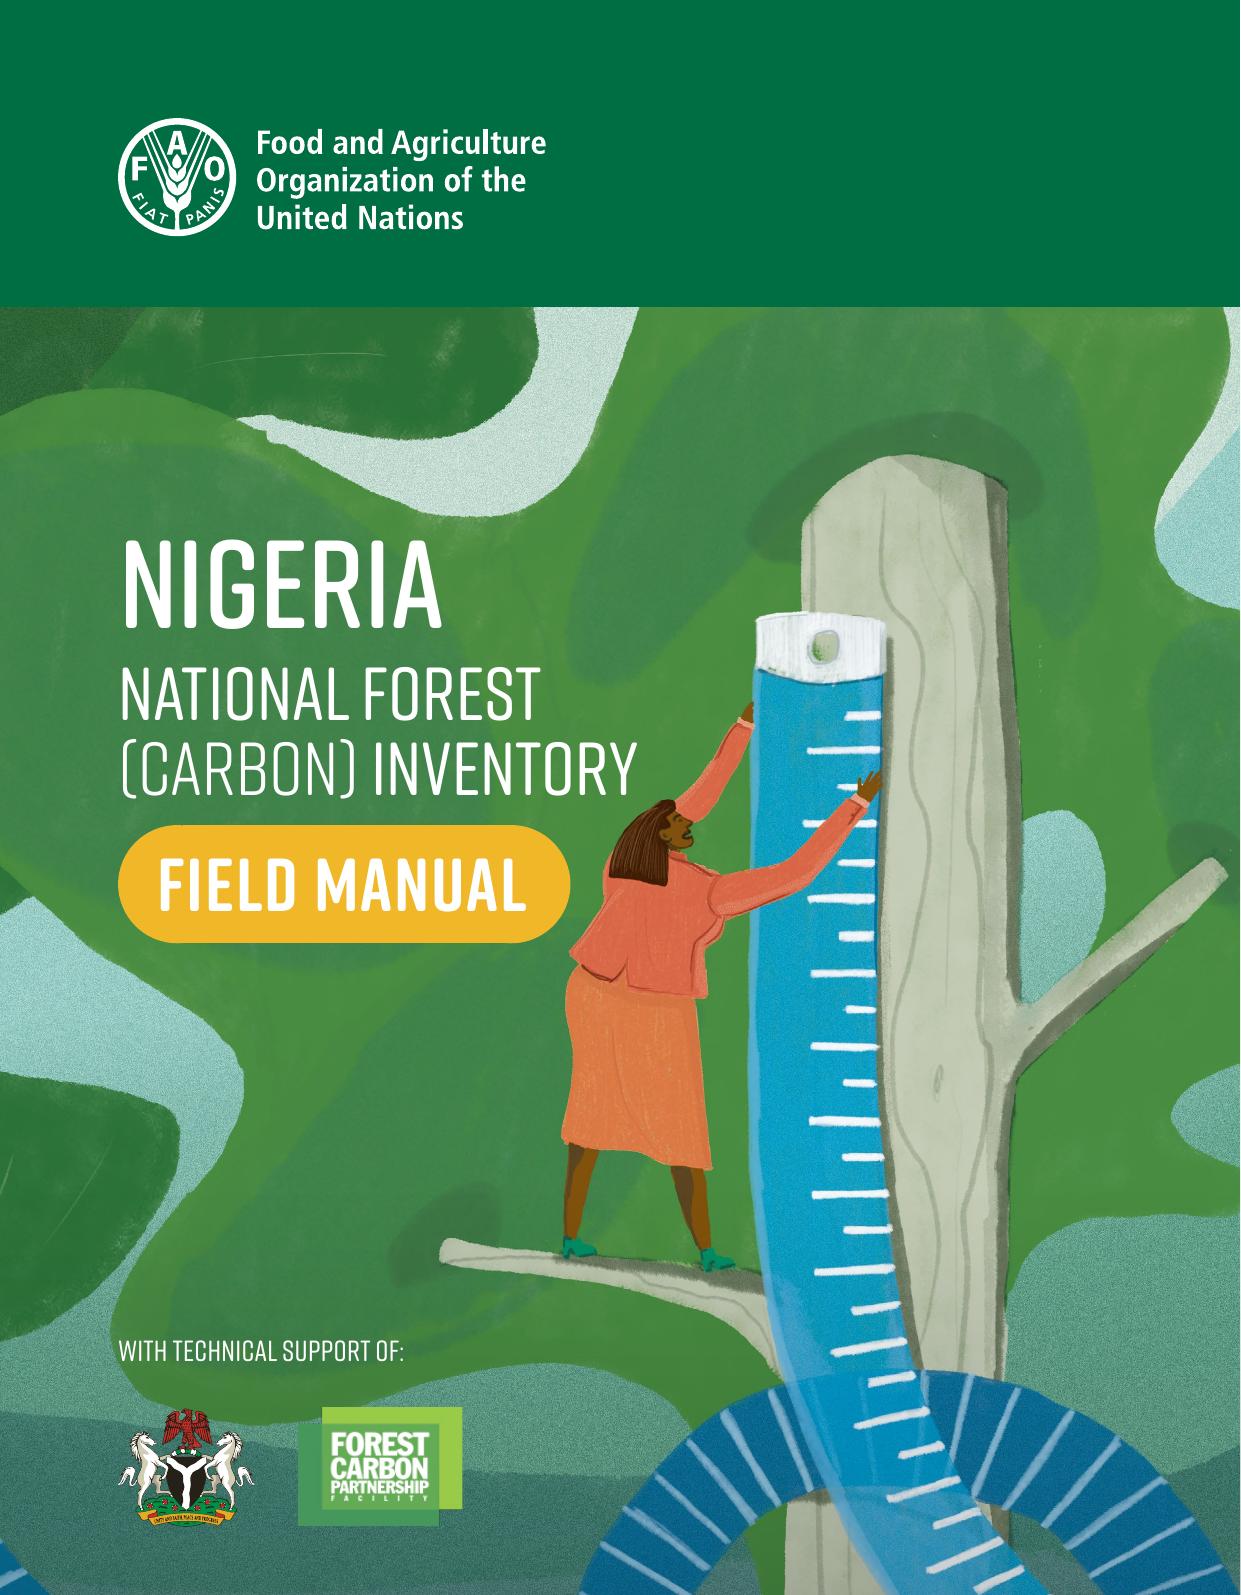 FAO Field Manual for Forest Carbon Inventory in Nigeria 2020